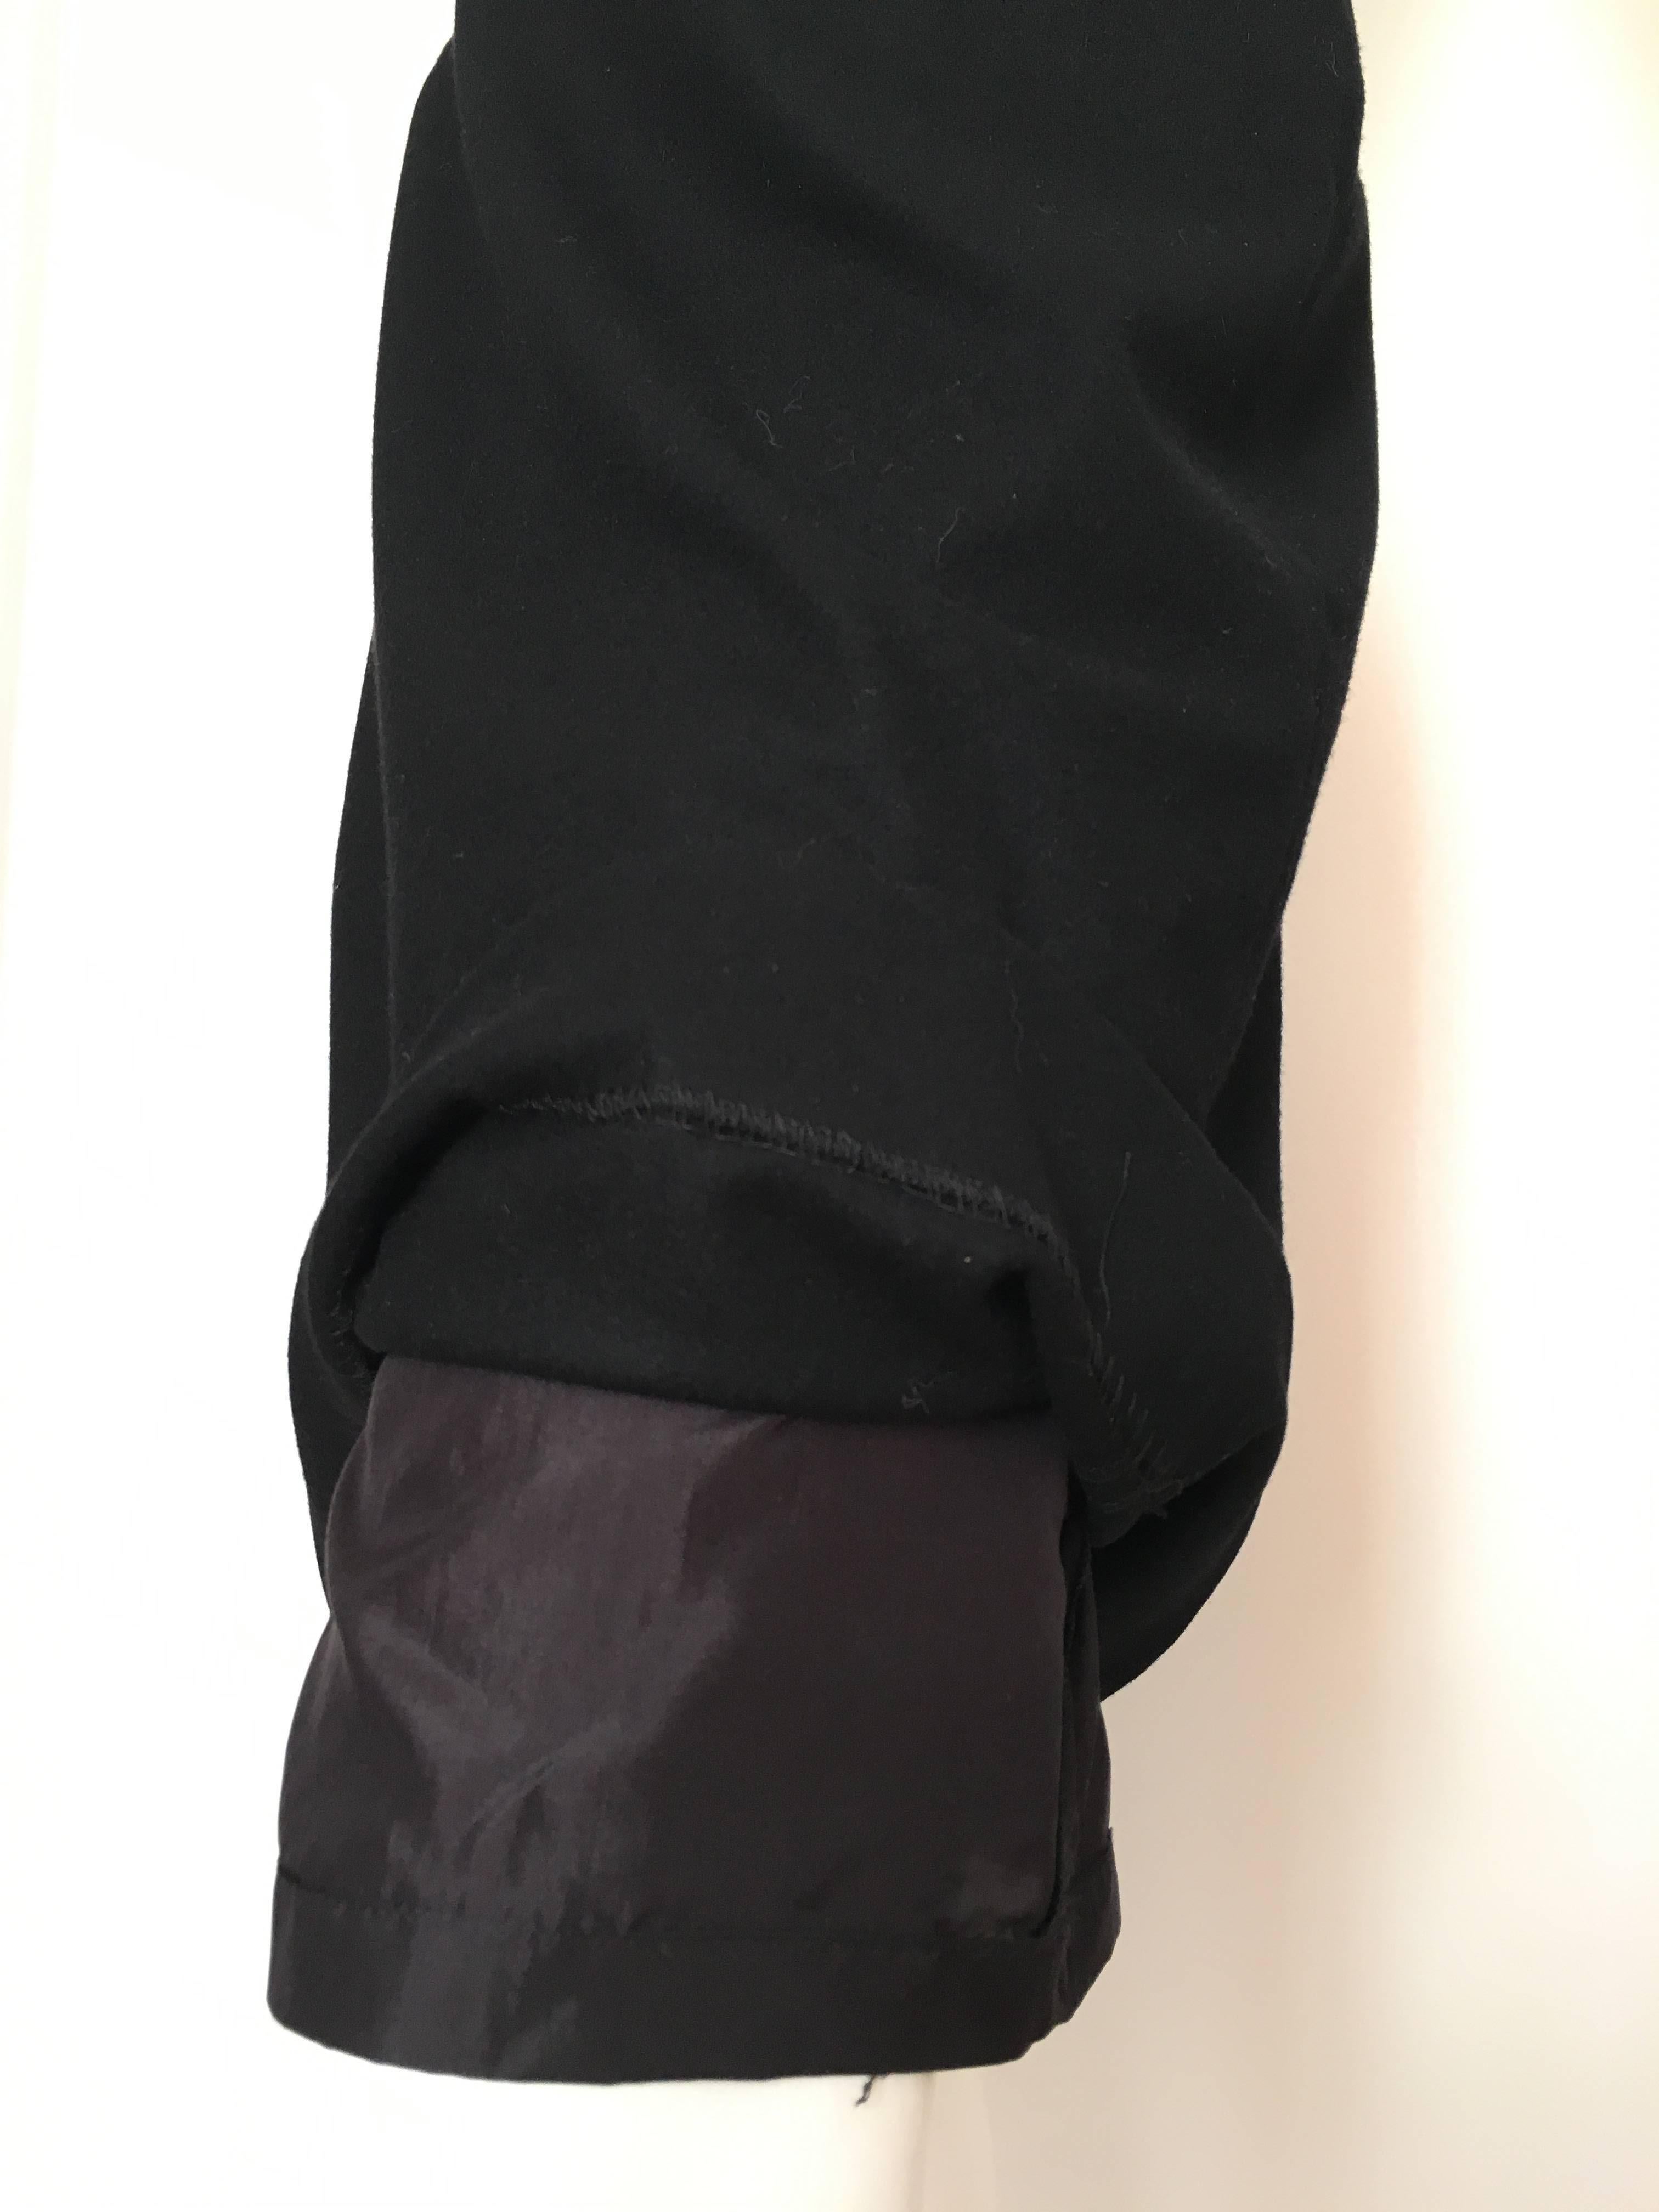 Karl Lagerfeld for Neiman Marcus 1980s Black Wool Cashmere Pencil Skirt Size 6. For Sale 3